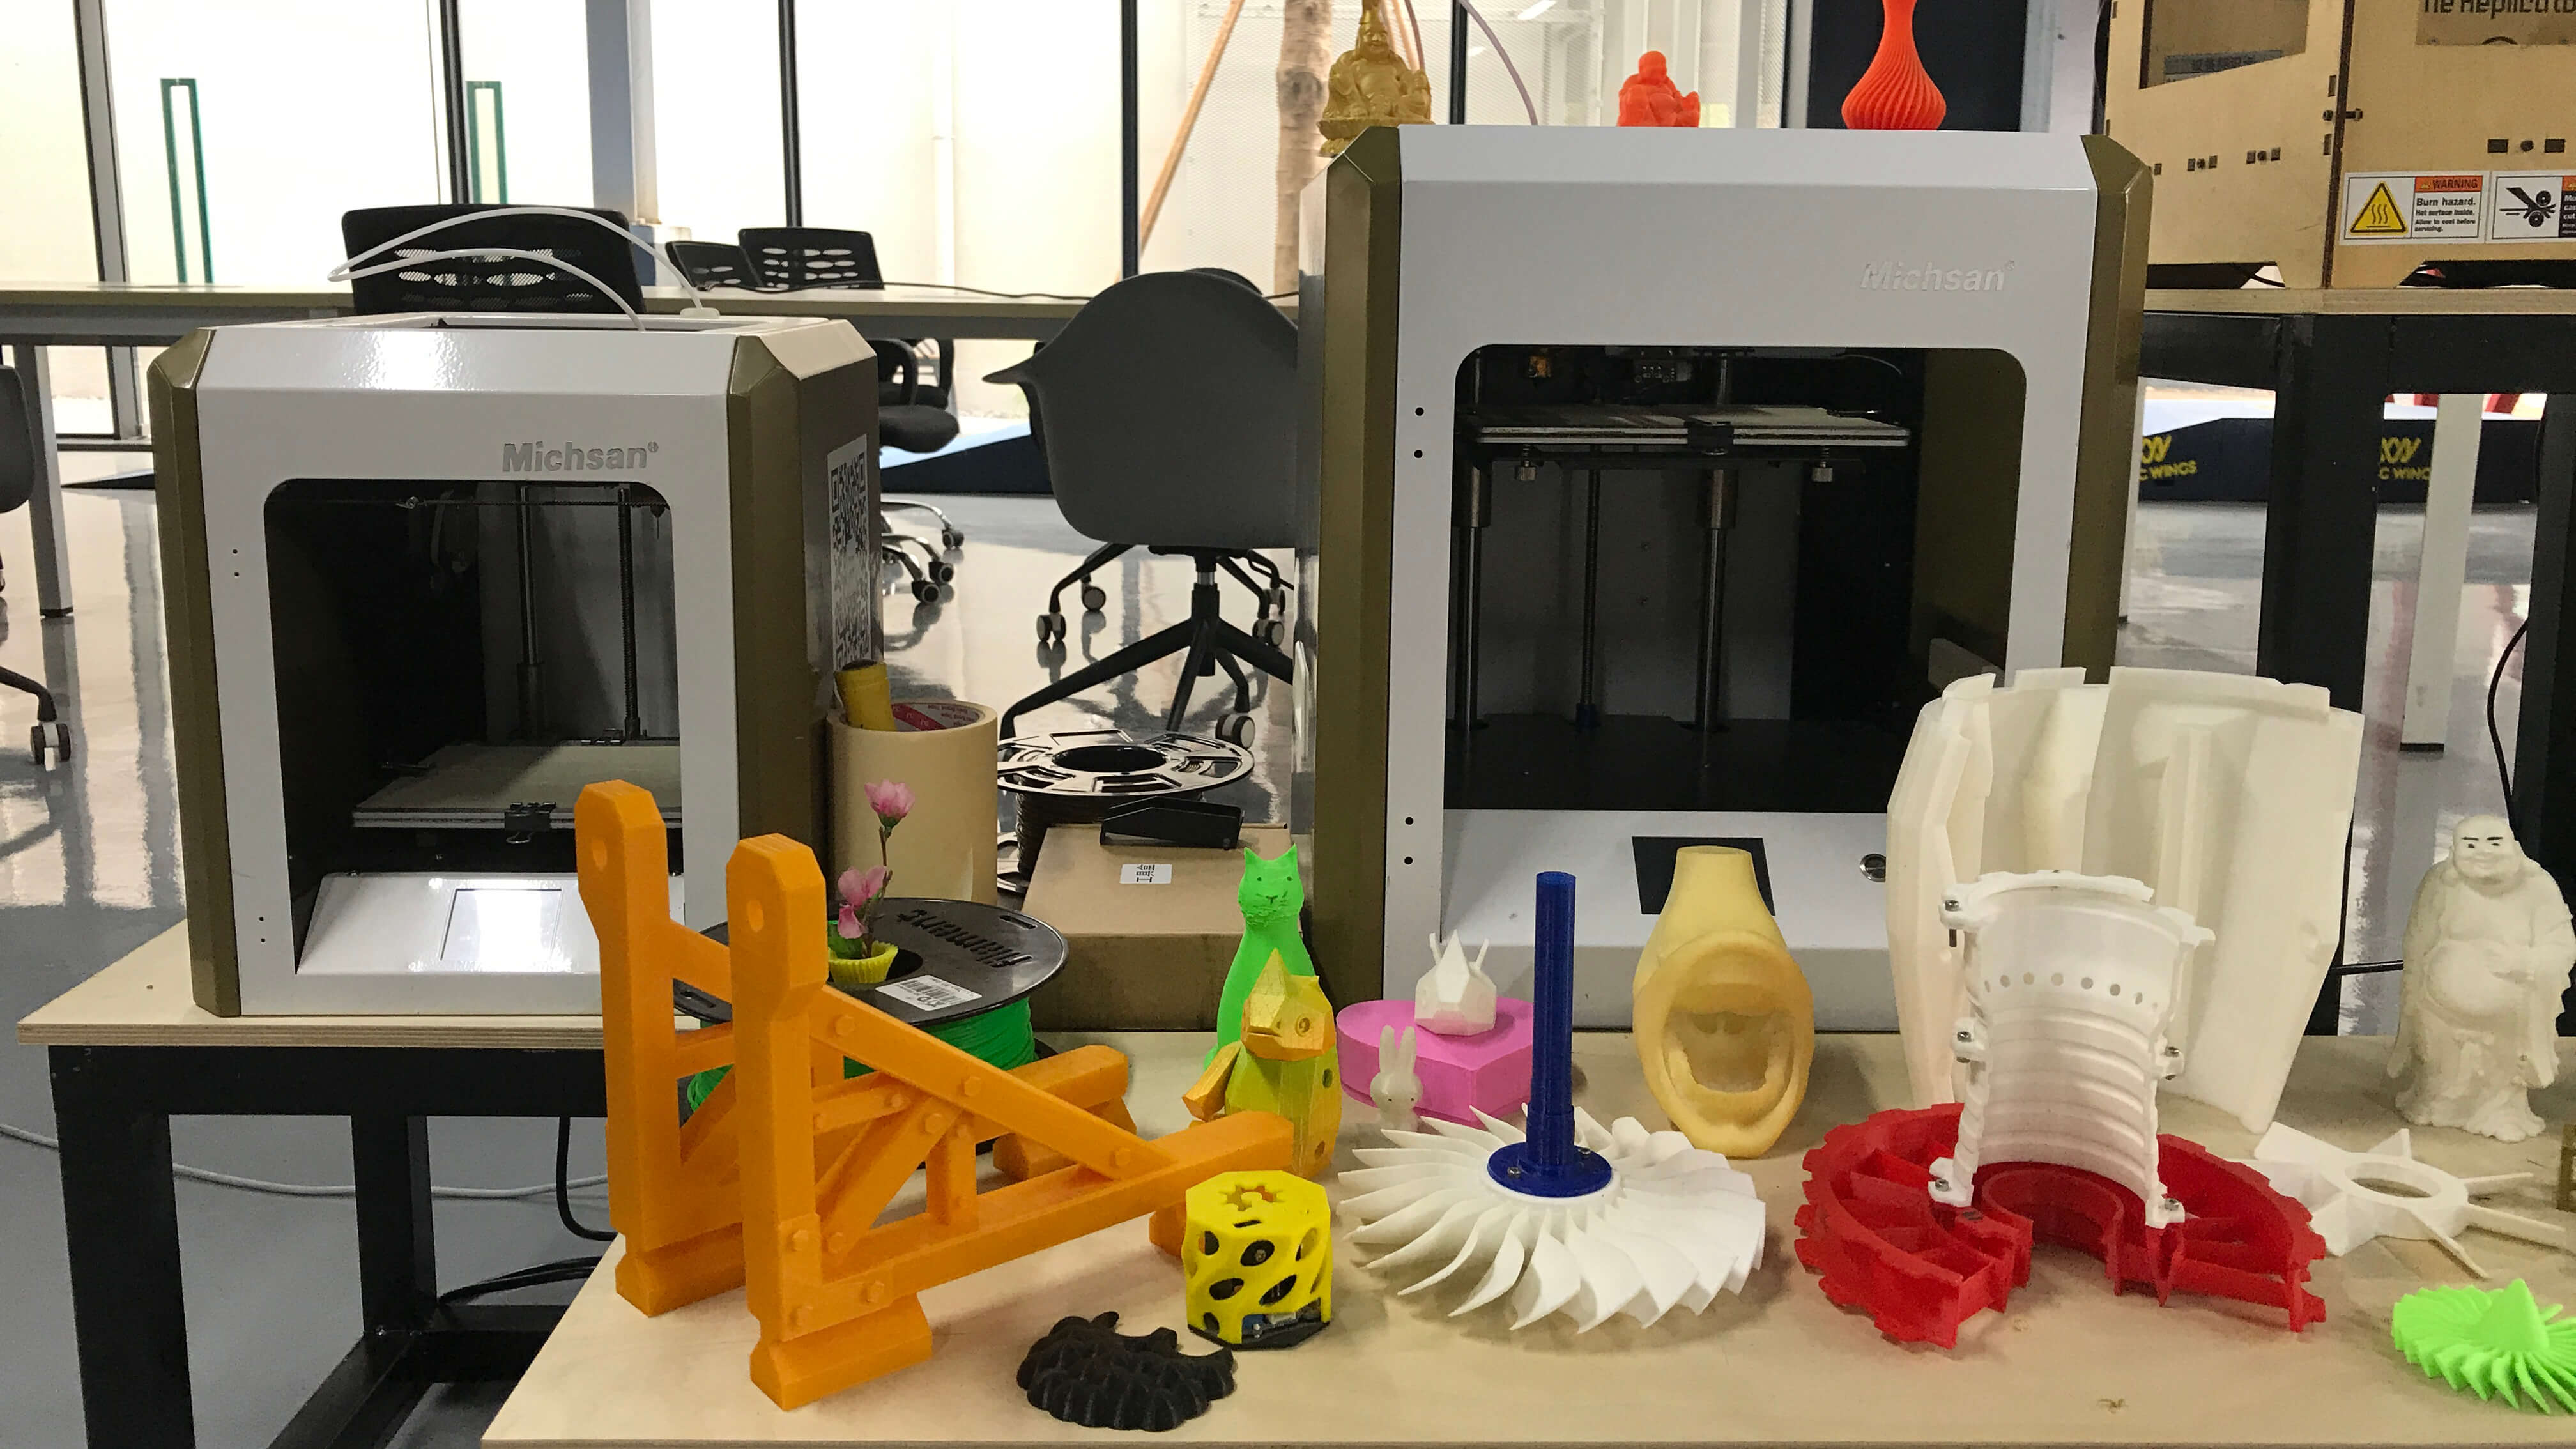 What is 3d printing? here’s what you need to know - Community Res...